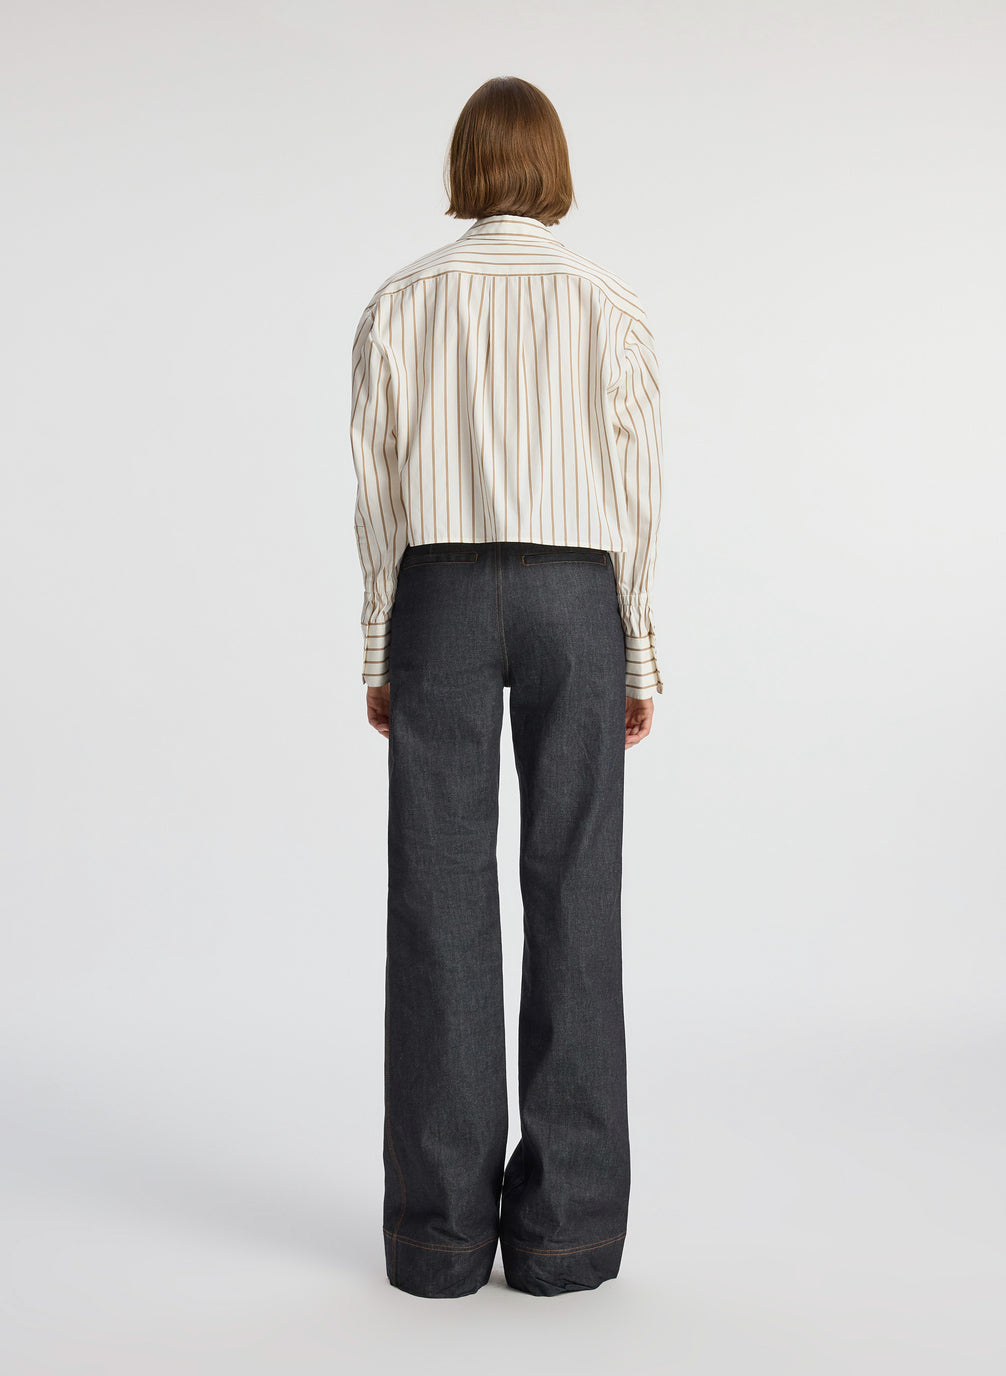 back view of woman wearing cream and brown striped collared shirt and dark wash raw denim jeans